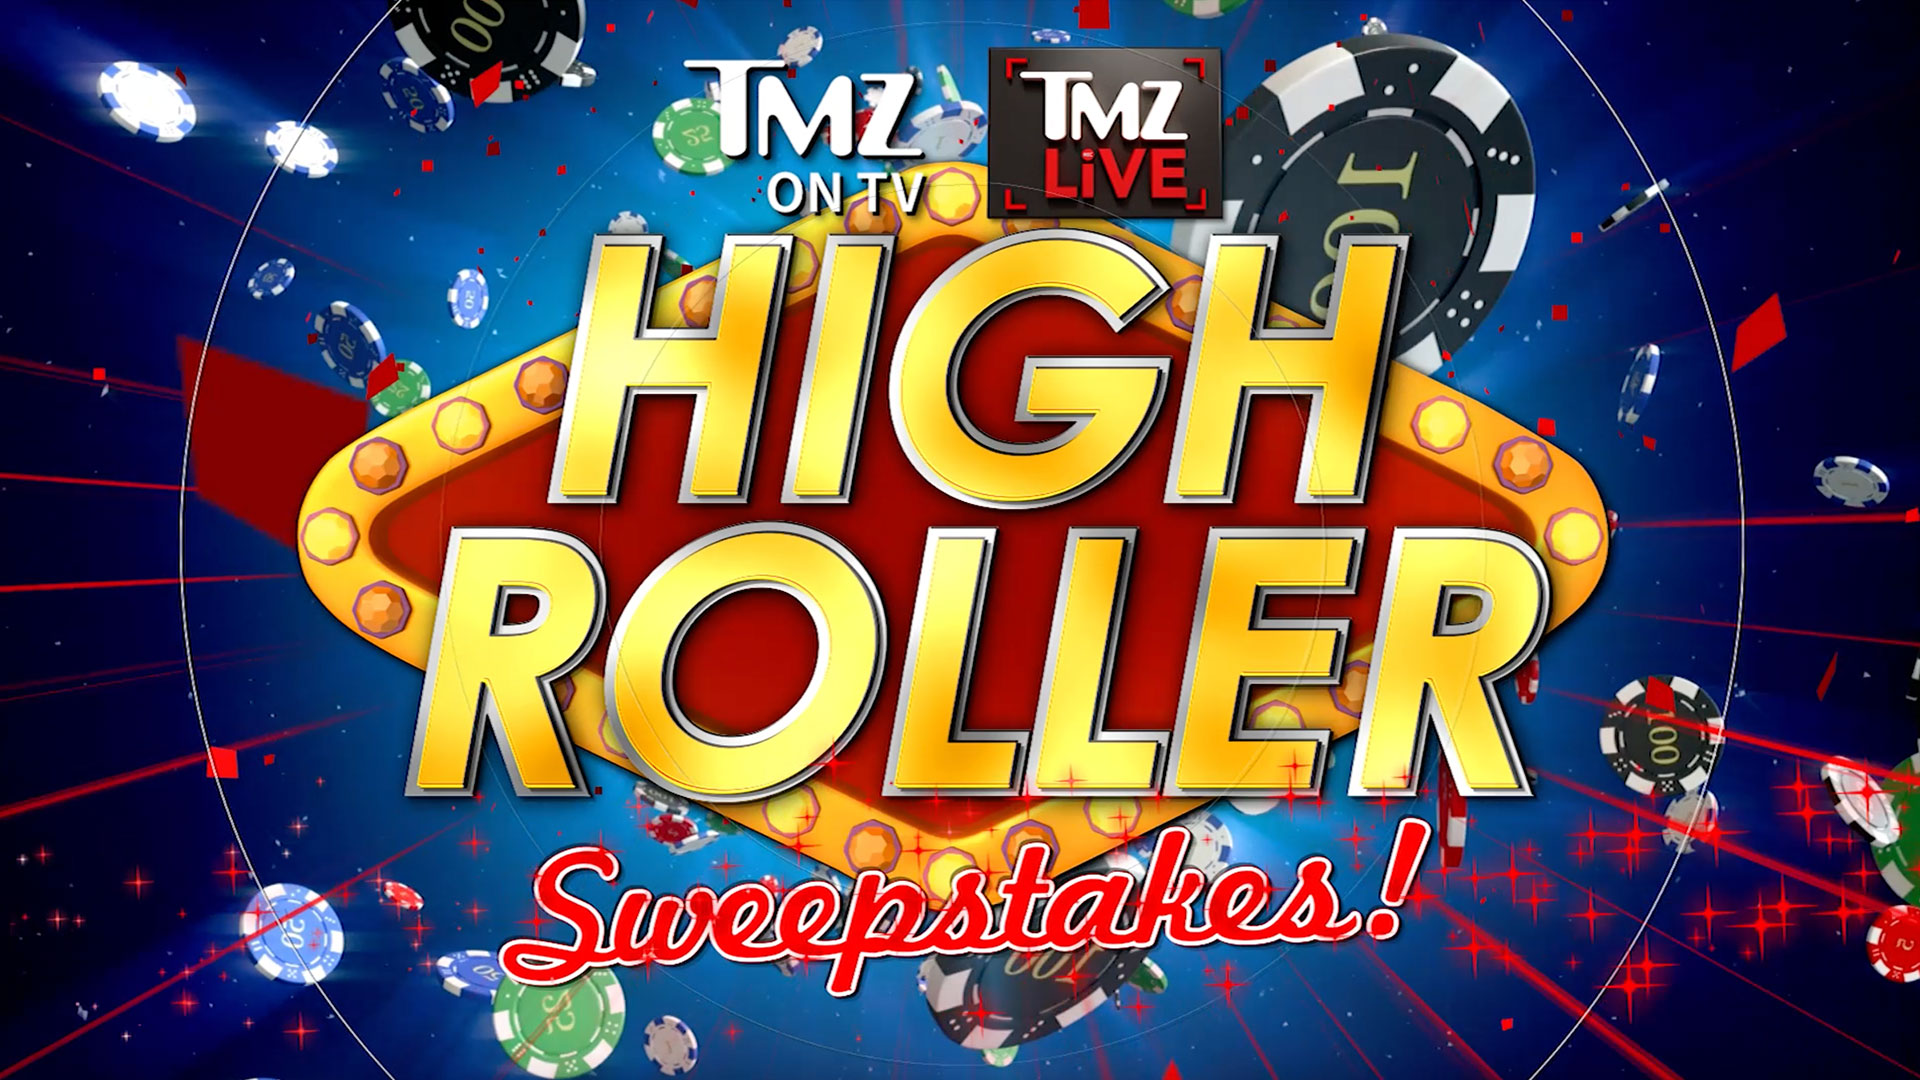 TMZ & TMZ LIVE's "Greatest Vacation Package Ever" Sweepstakes